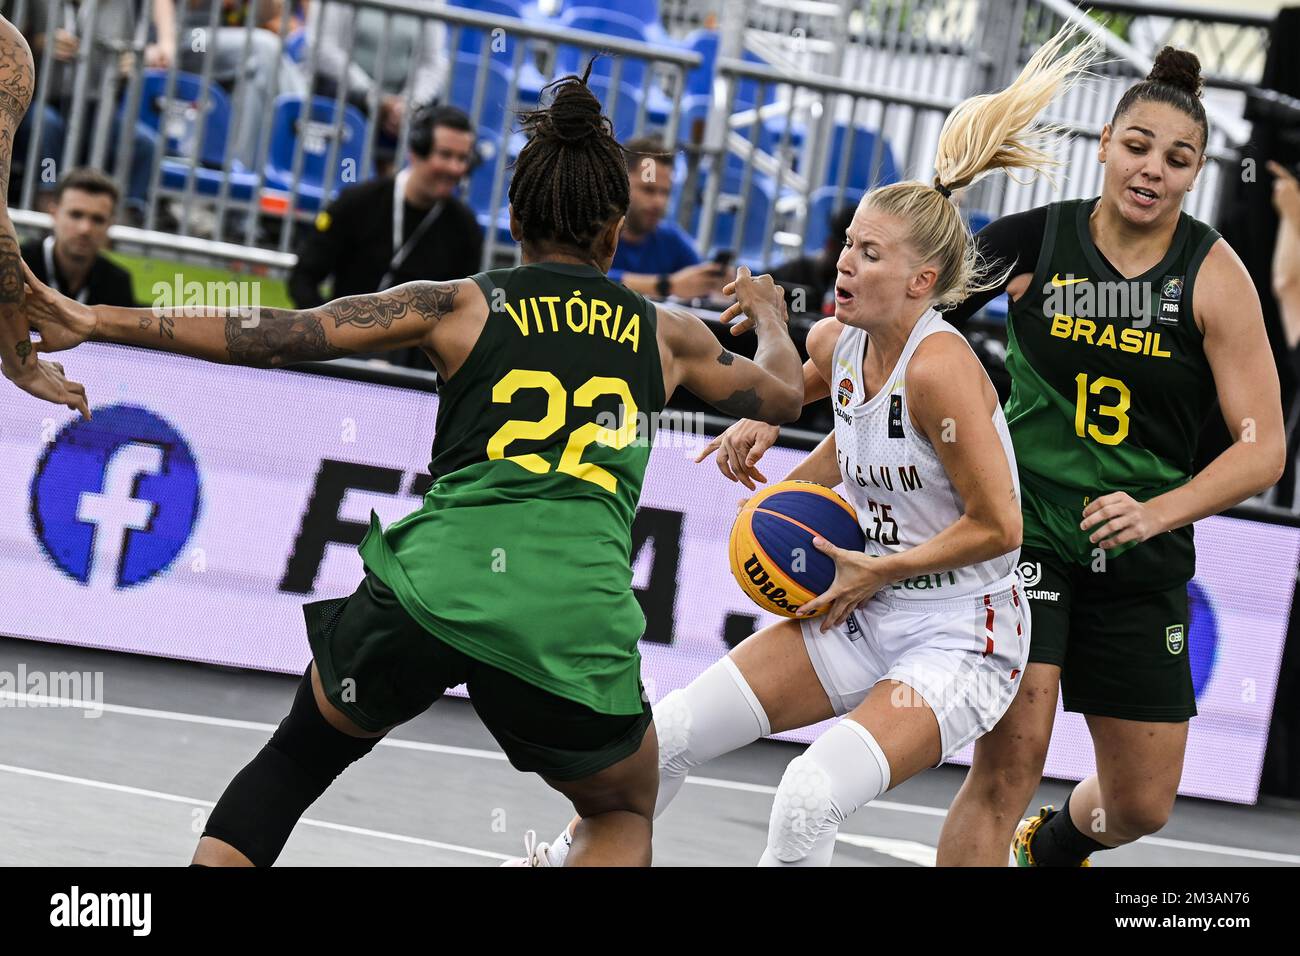 Brazil's Vitoria Marcelino, Belgium's Julie Vanloo and Brazil's Gabriela  Guimaraes pictured in action during a 3x3 basketball game between the  Belgian Cats and Brasil, in the Women's eighth final round at the